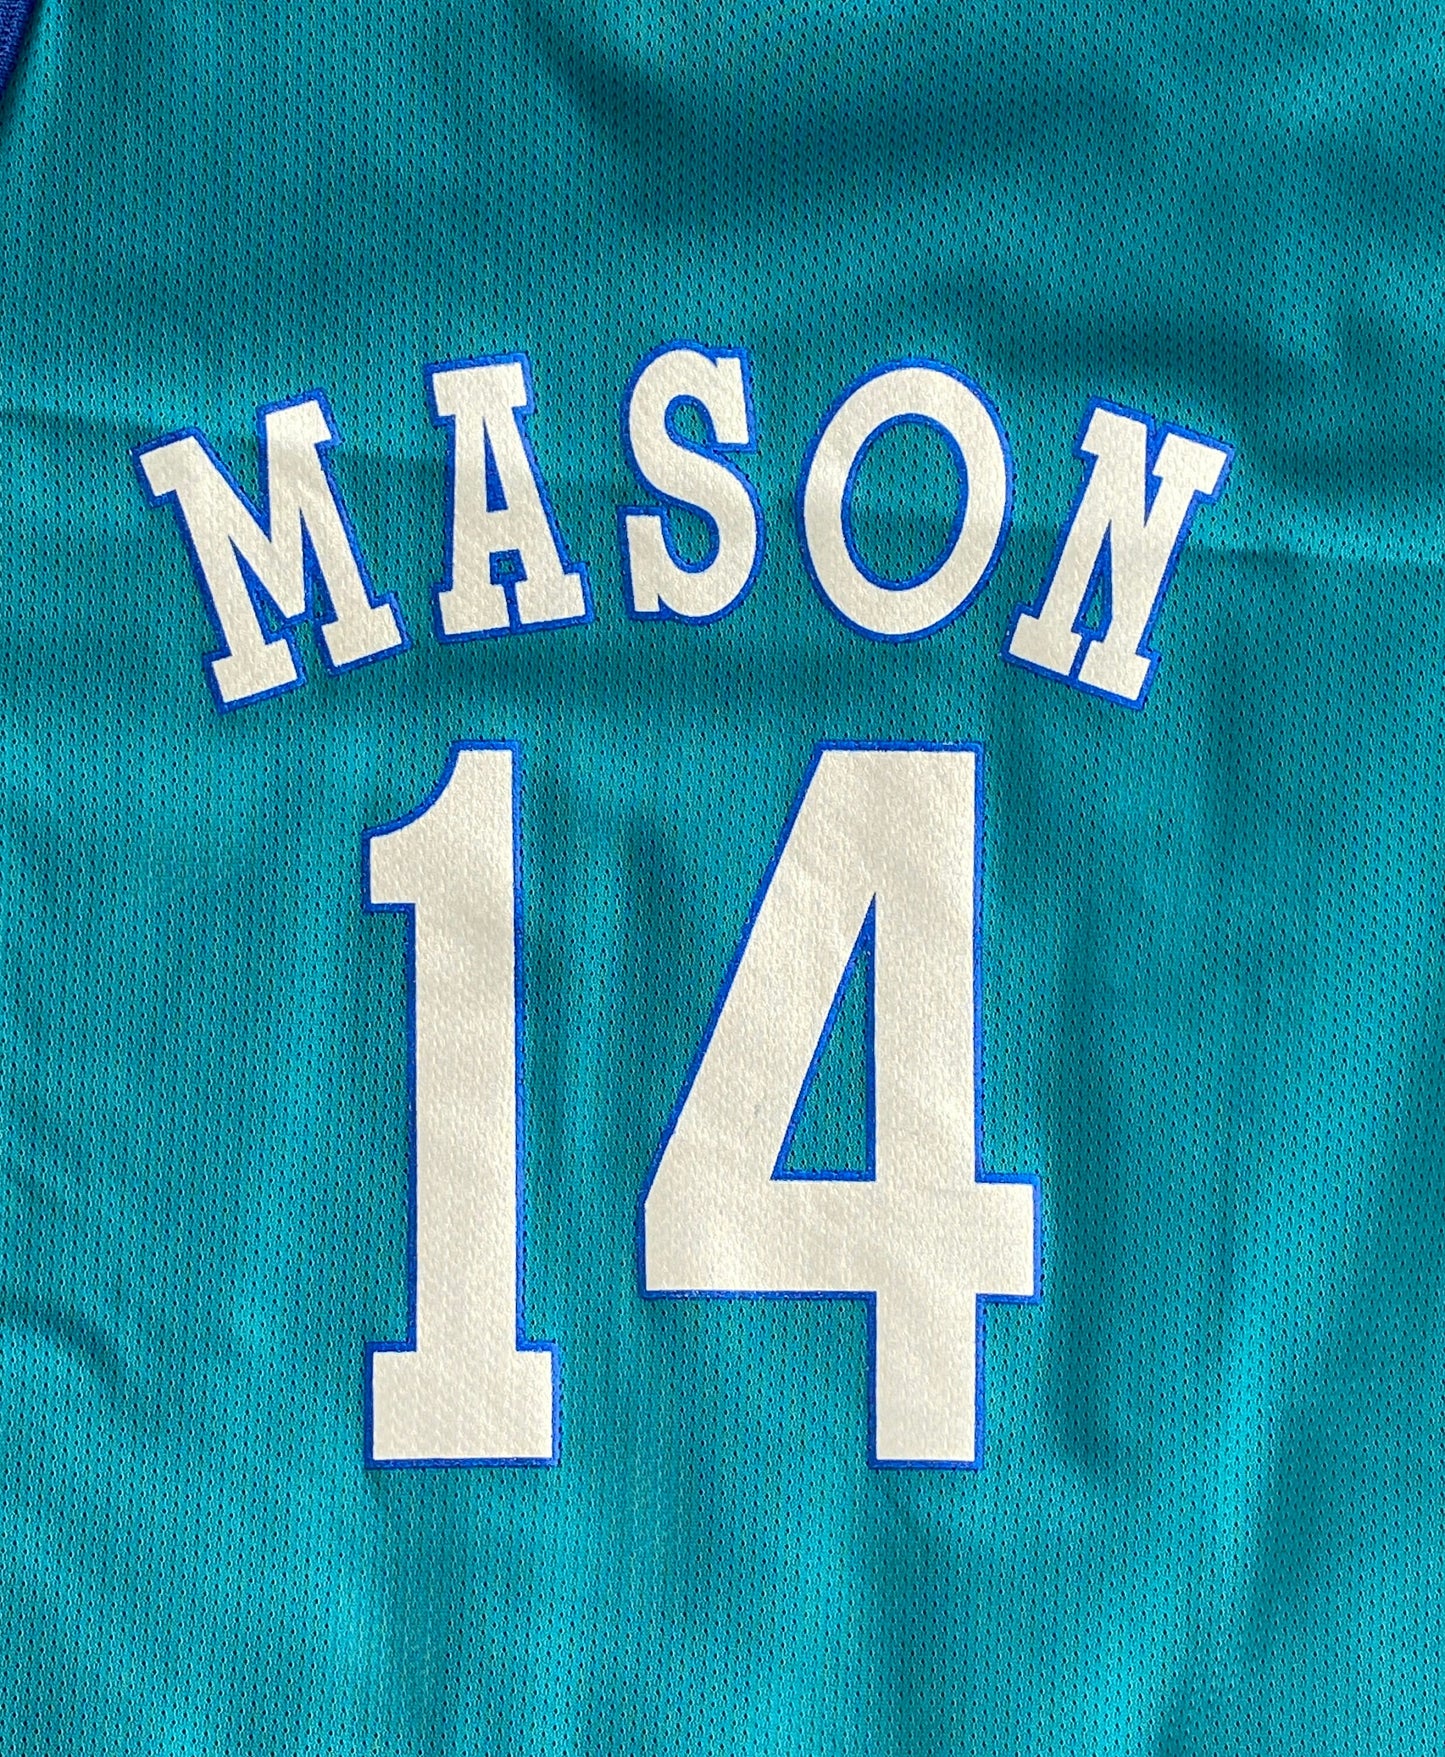 Youth 18-20. Vintage 90s NBA Champion Mason #14 Jersey Charlotte Hornets Made In USA